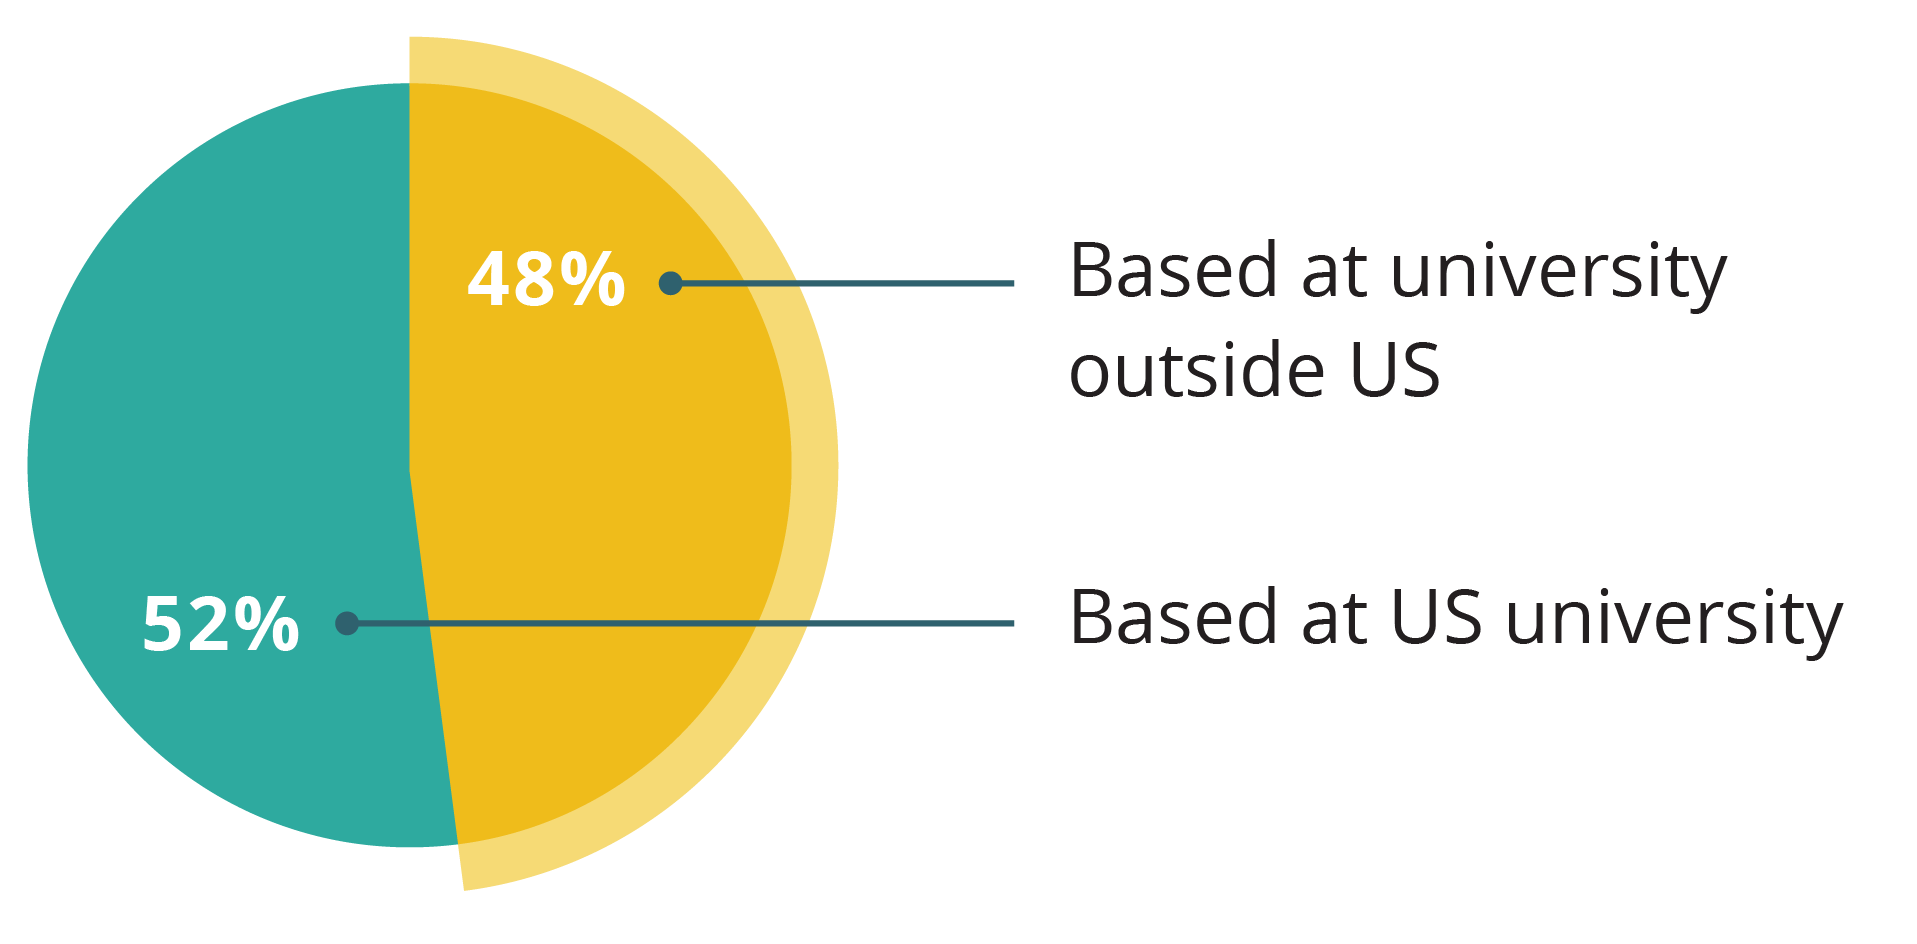 pie chart showing 48% of invited researchers based at a university outside of the US and 52% based at US university